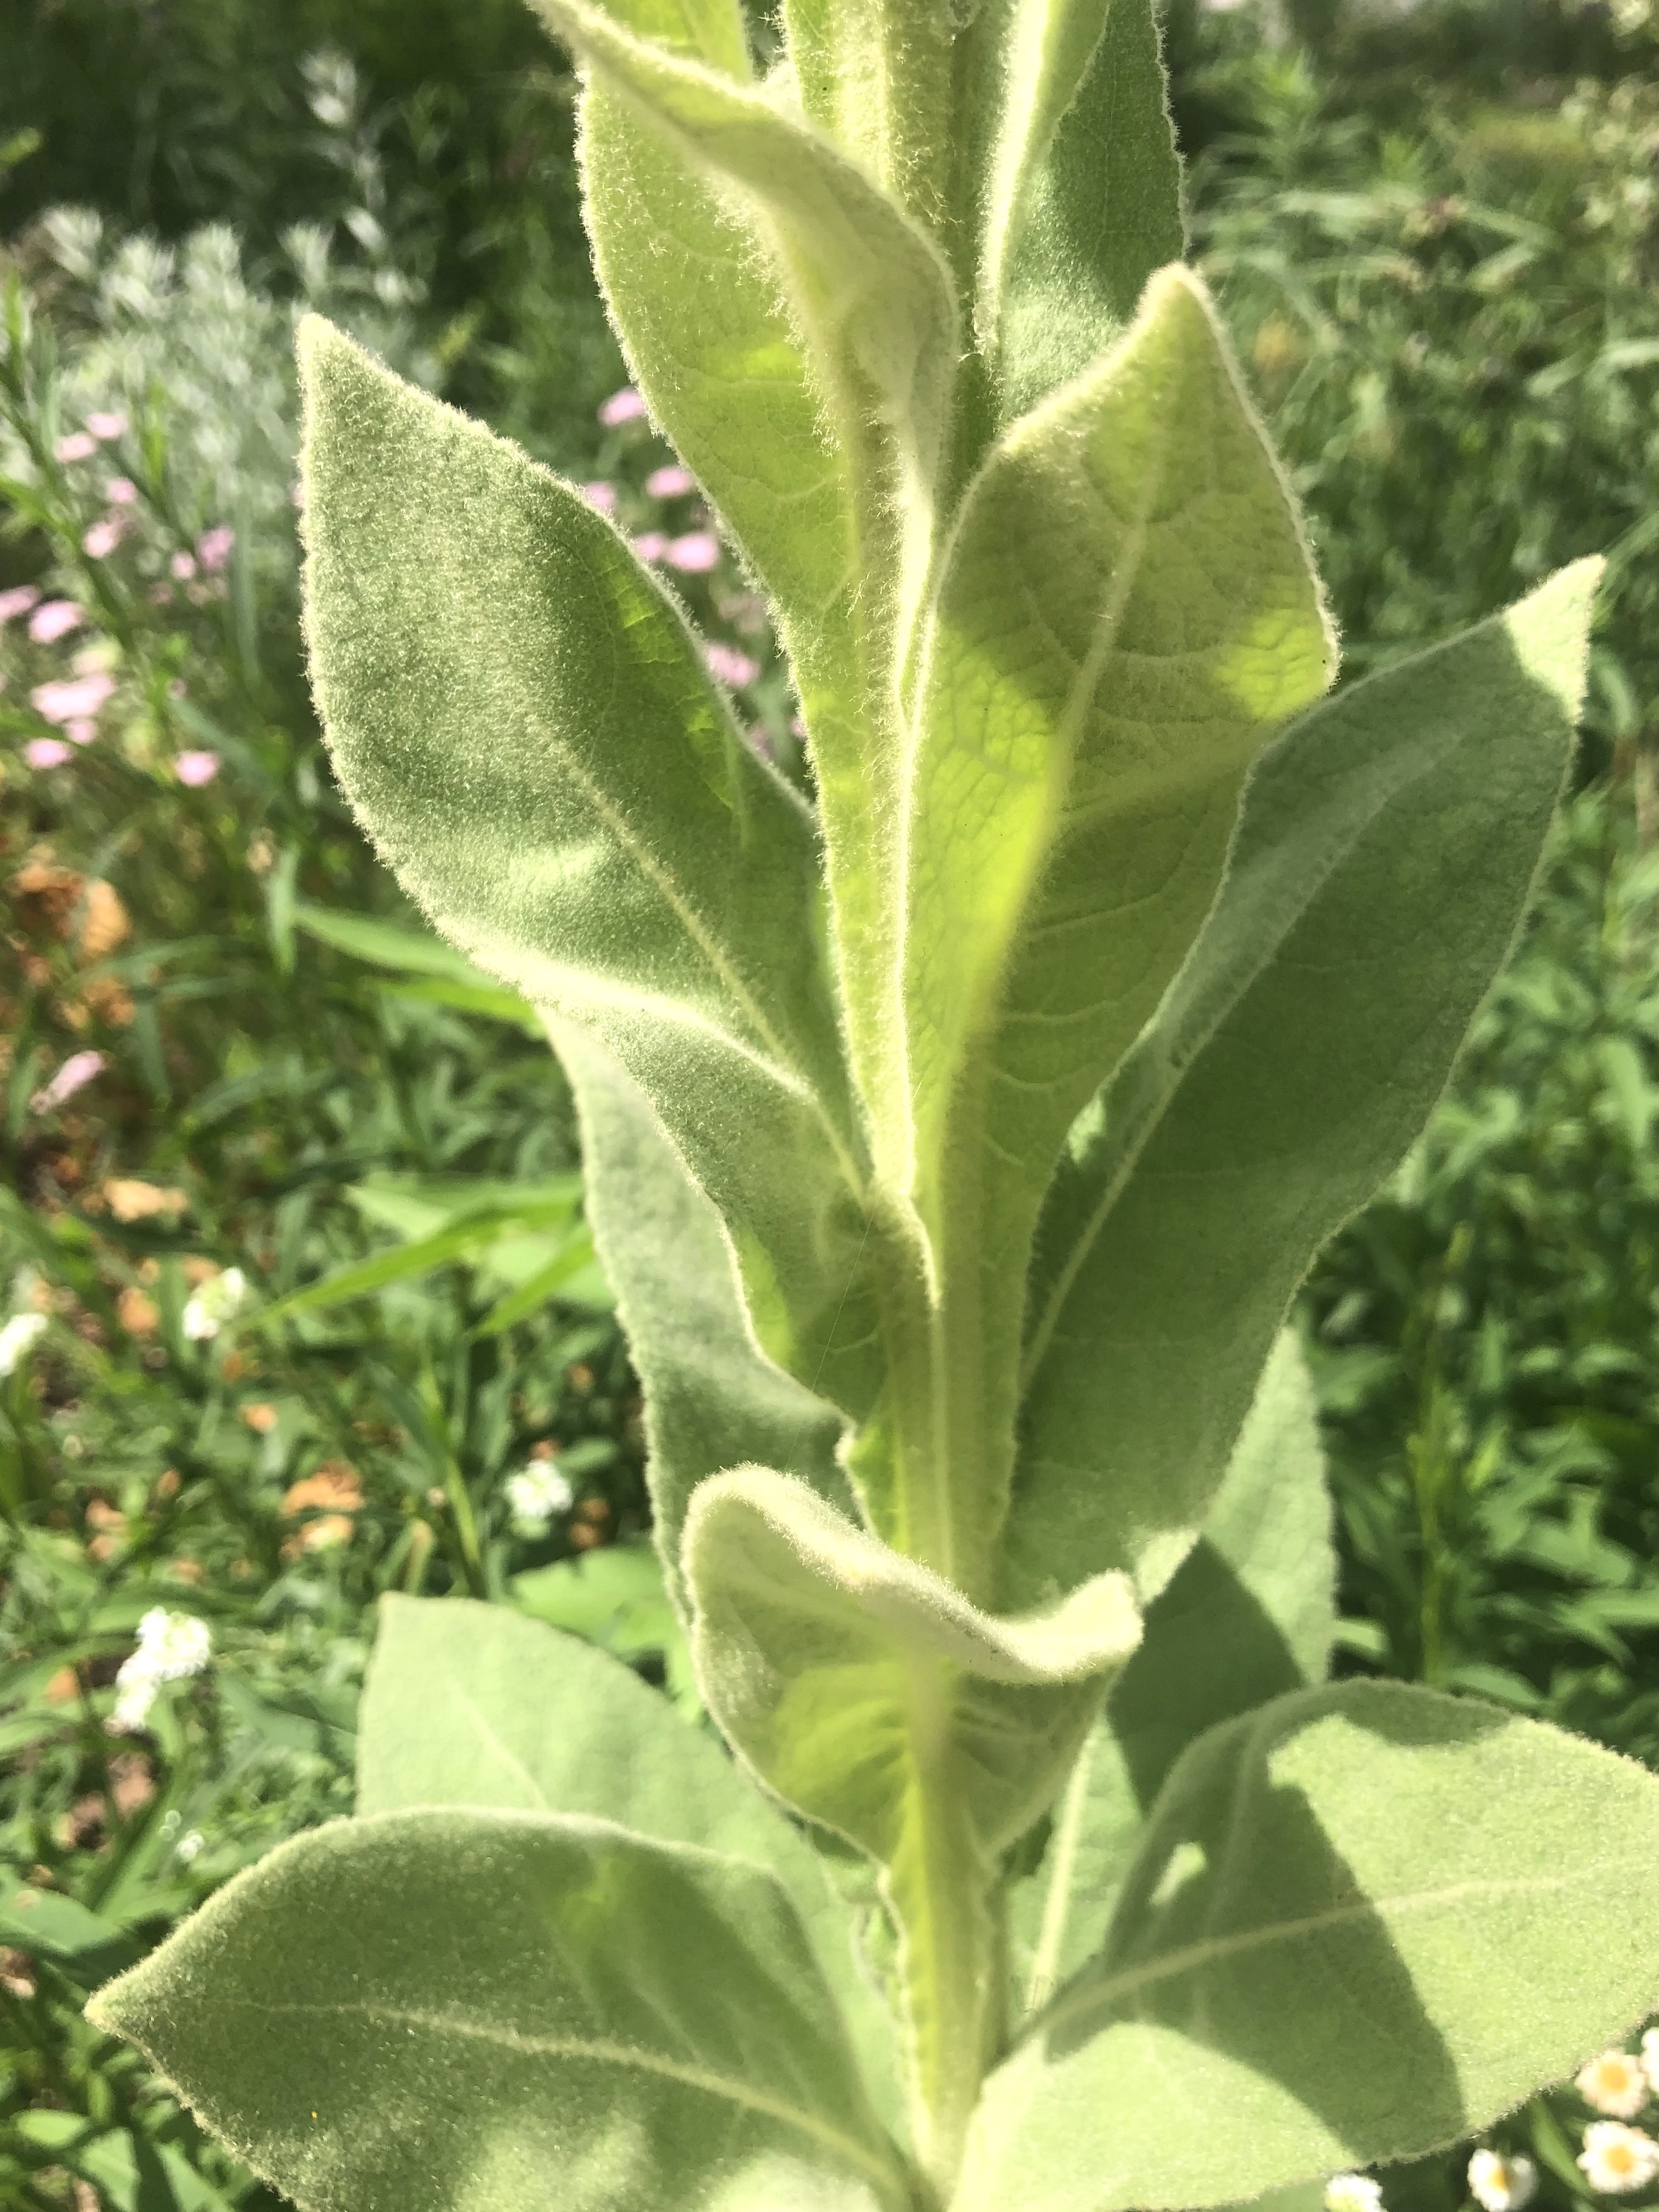 Common Mullein on shore of Marion Dunn Pond on JuLY 7, 2022.